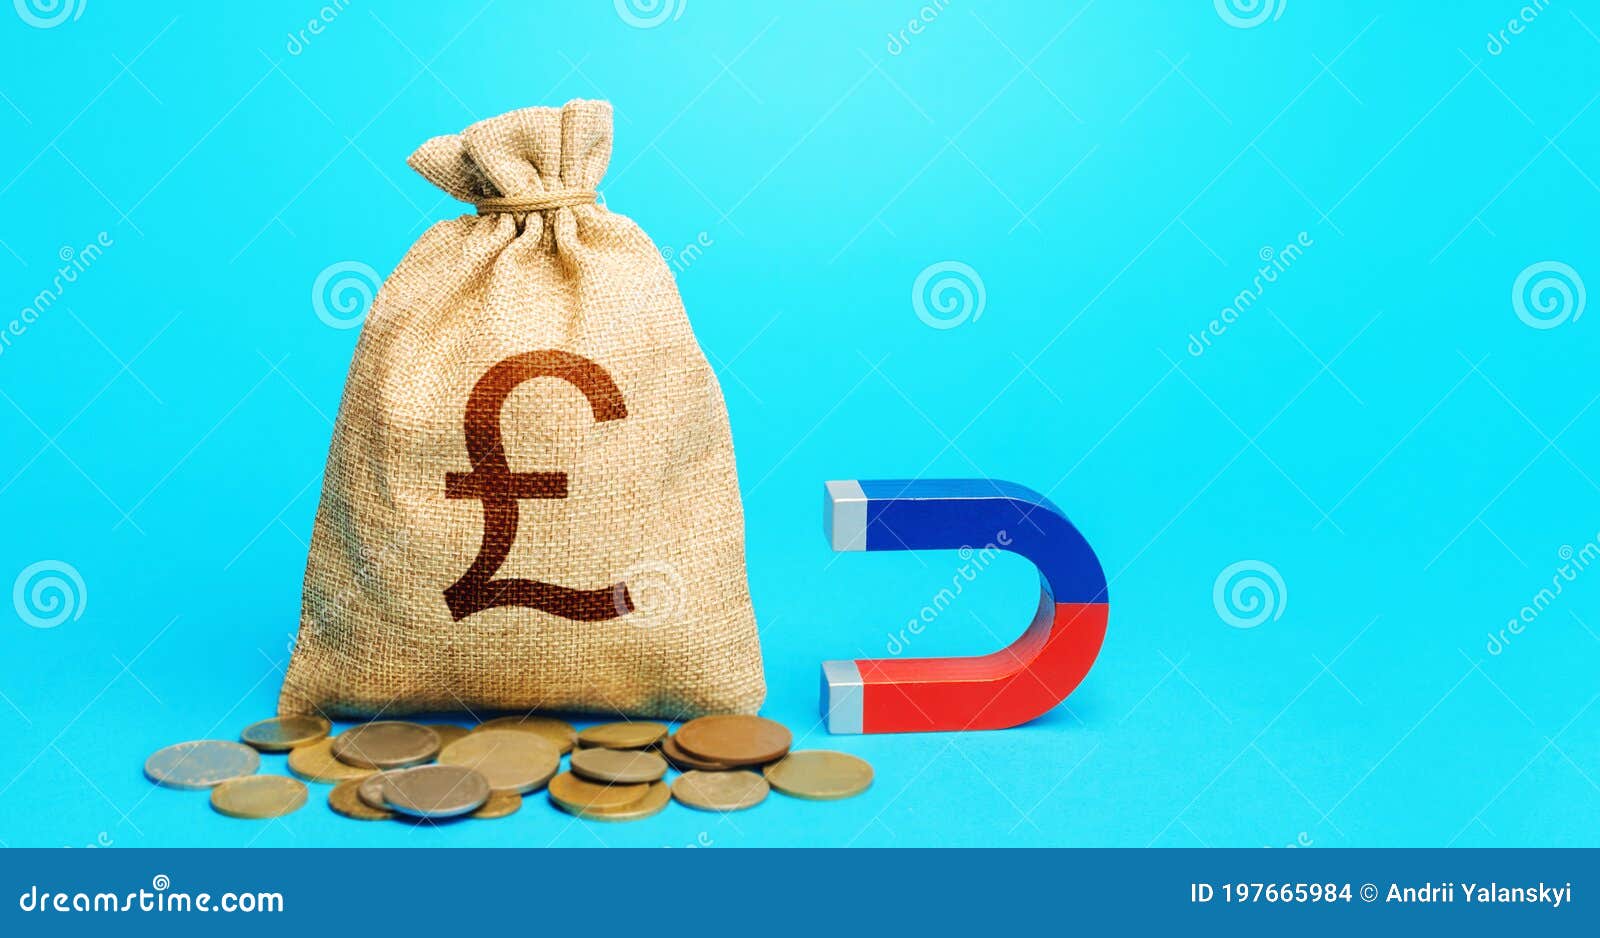 british pound sterling money bag and magnet. raising funds and investments in business projects and startups. accumulation